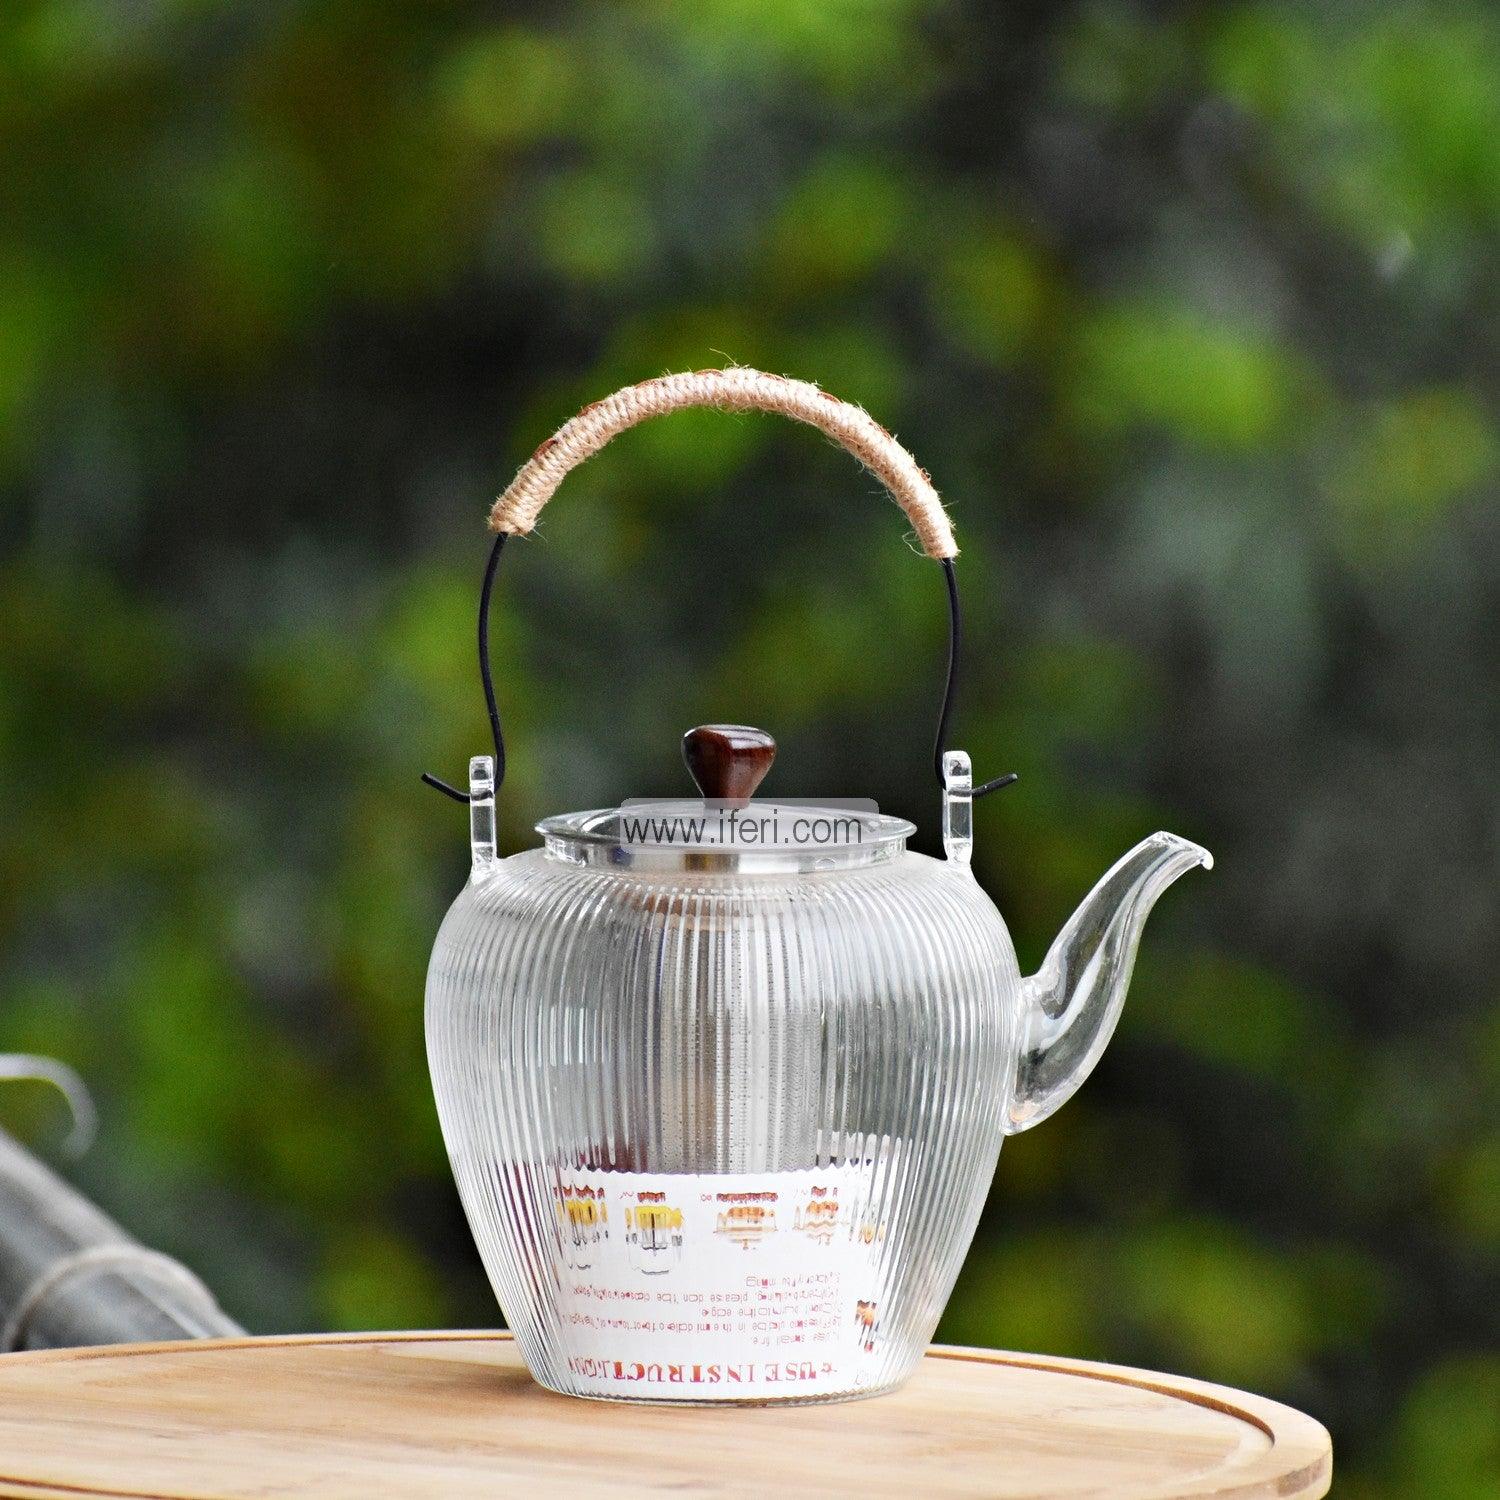 5 Inch Tempered Glass Tea Pot with Infuser RY0142 Price in Bangladesh - iferi.com